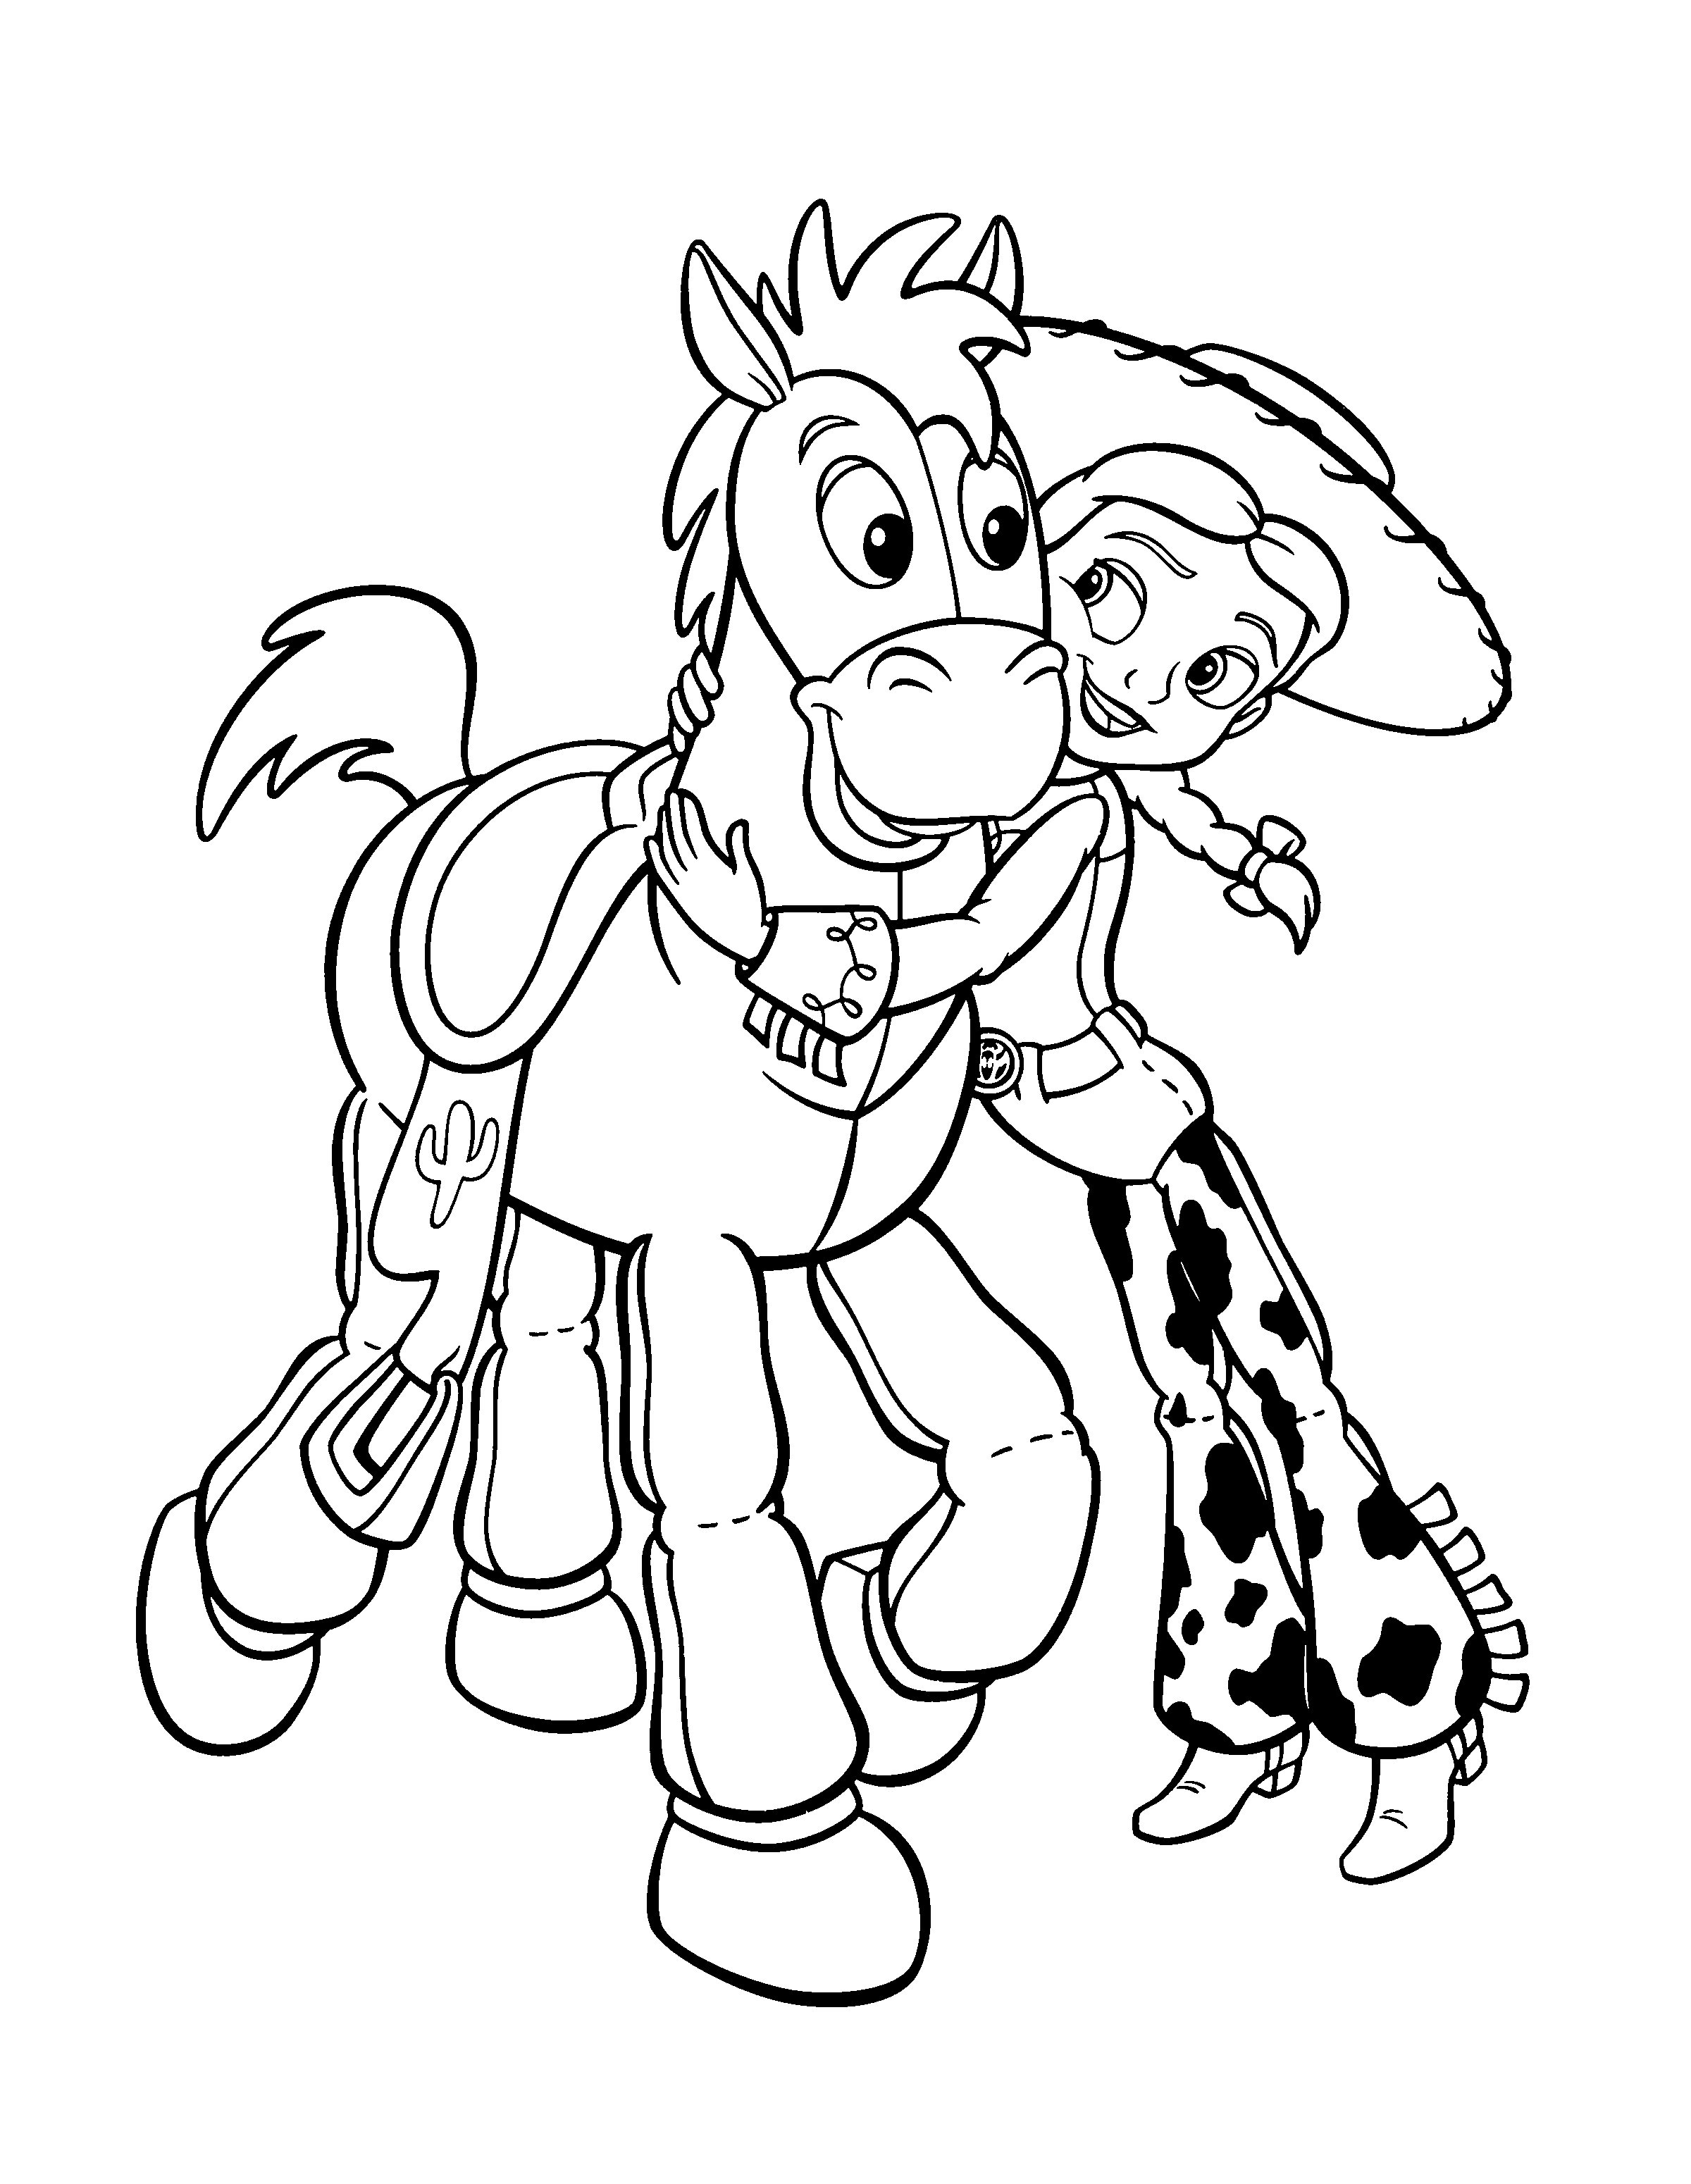 Drawings Toy Story Animation Movies Printable Coloring Pages